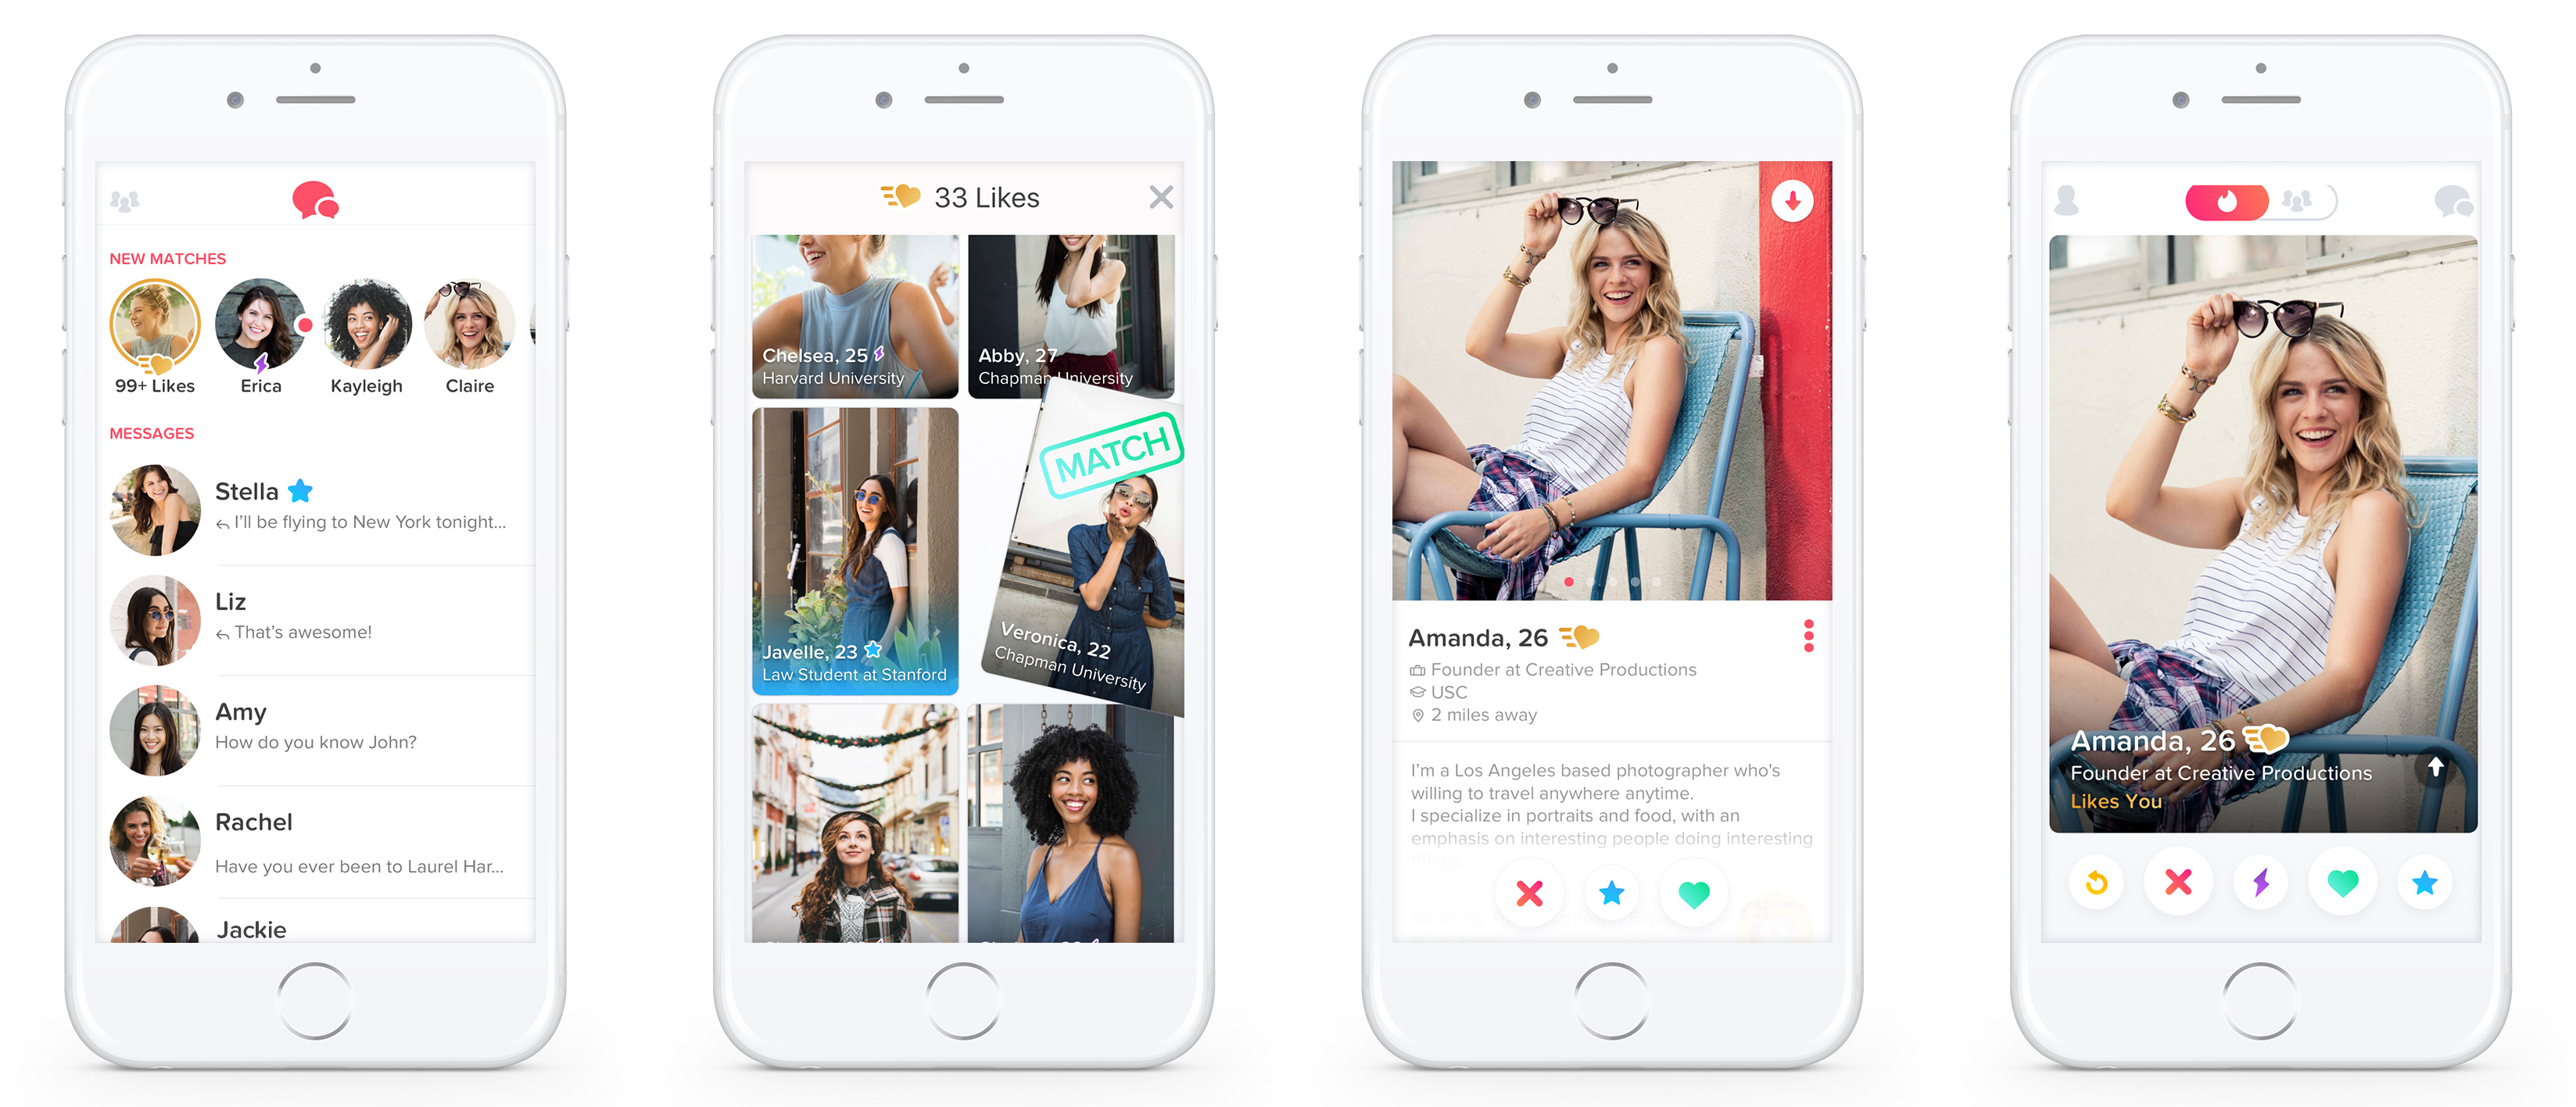 How to find tinder full profile pictures